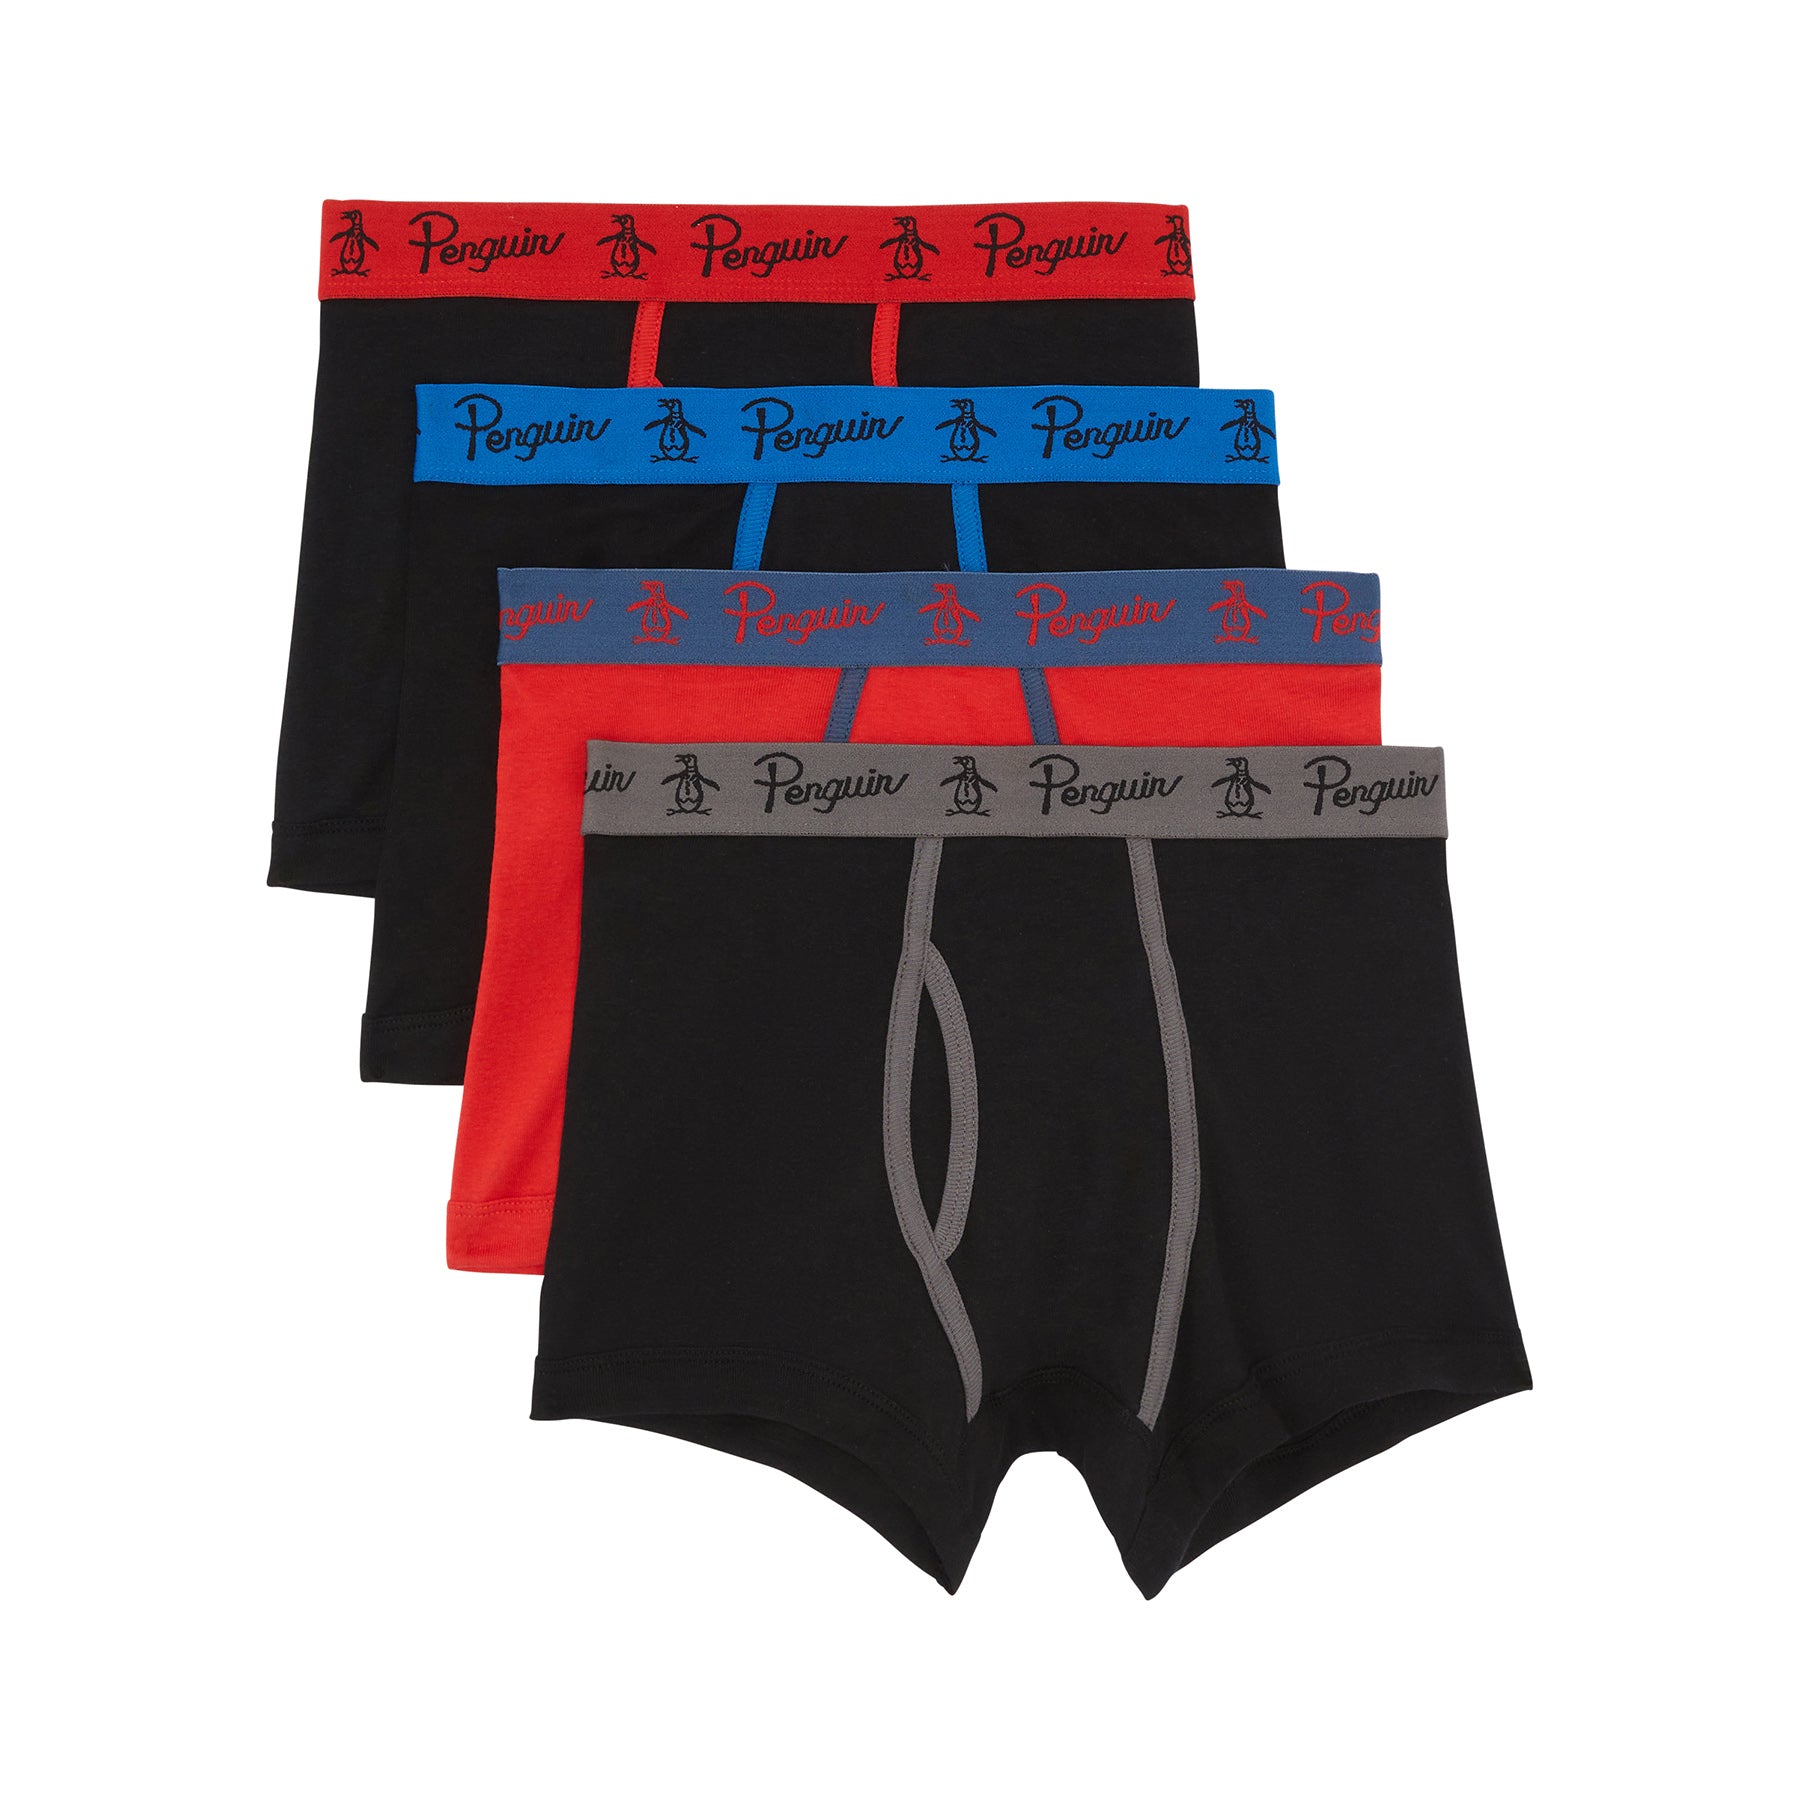 View 4 Pack Keyhole Underwear In Black And Red information